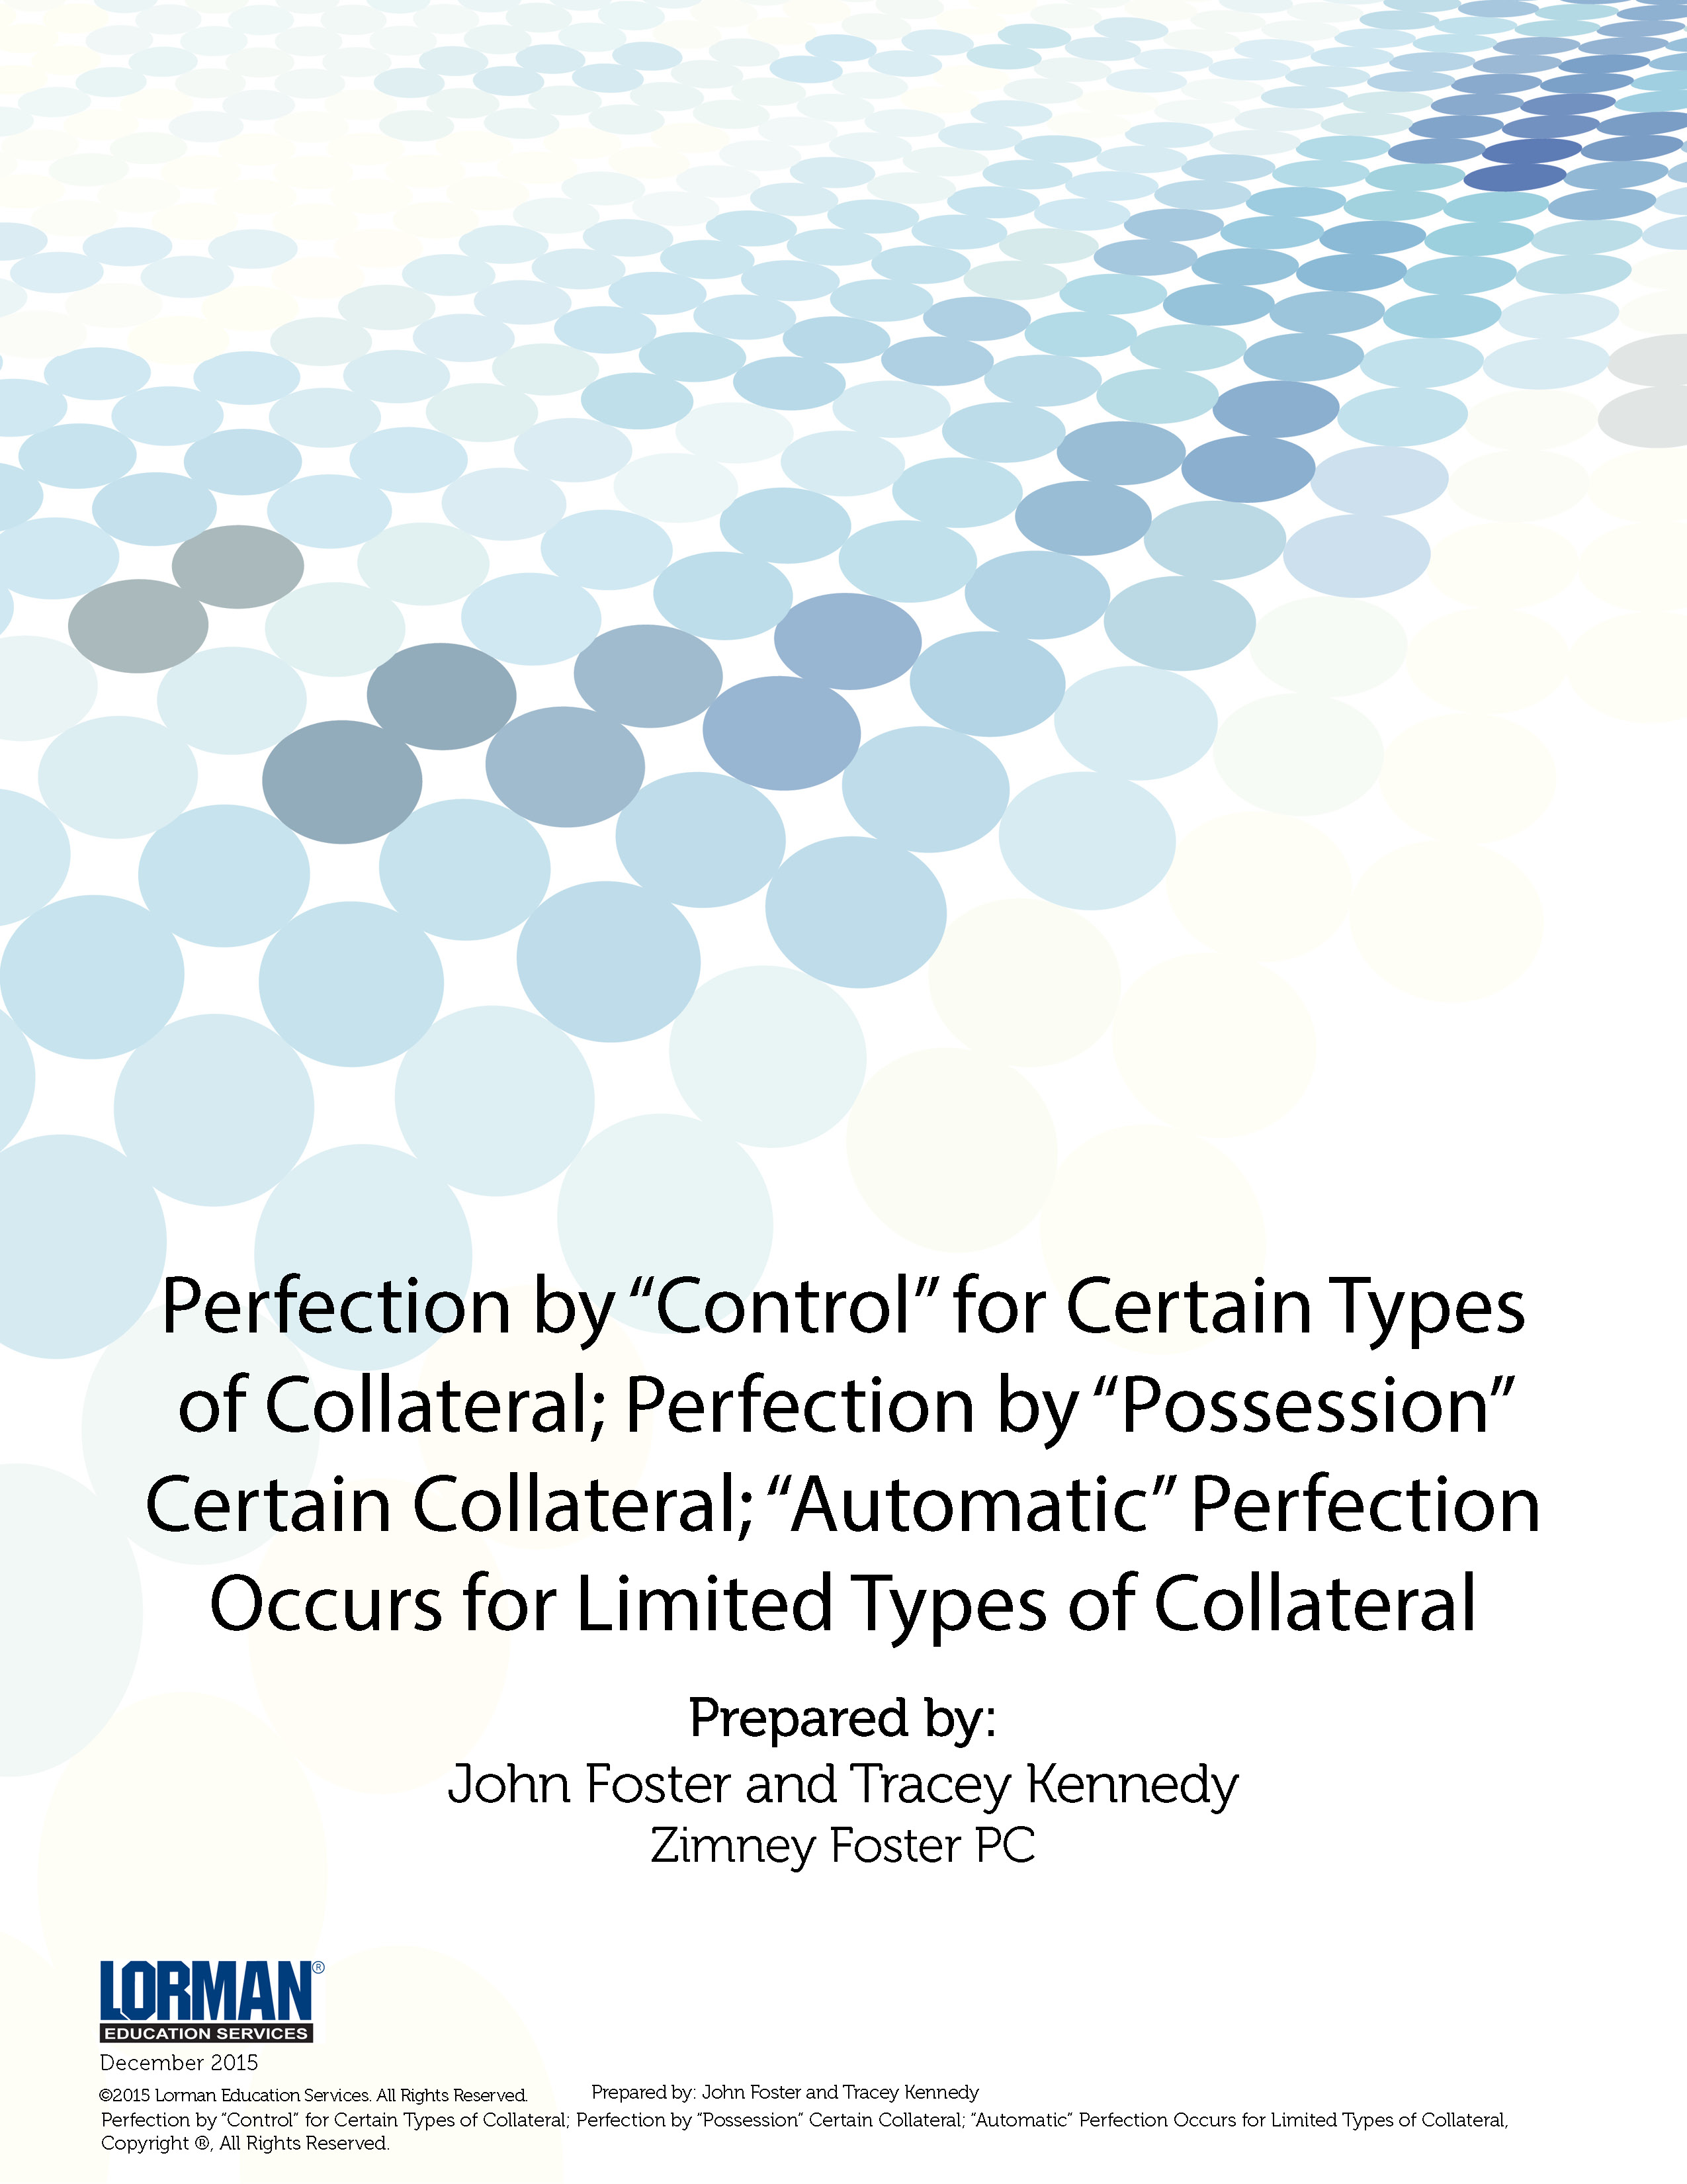 Perfection by Control for Certain Types of Collateral; Perfection by Possession for Certain Collateral; Automatic Perfection Occurs for Limited Types of Collateral